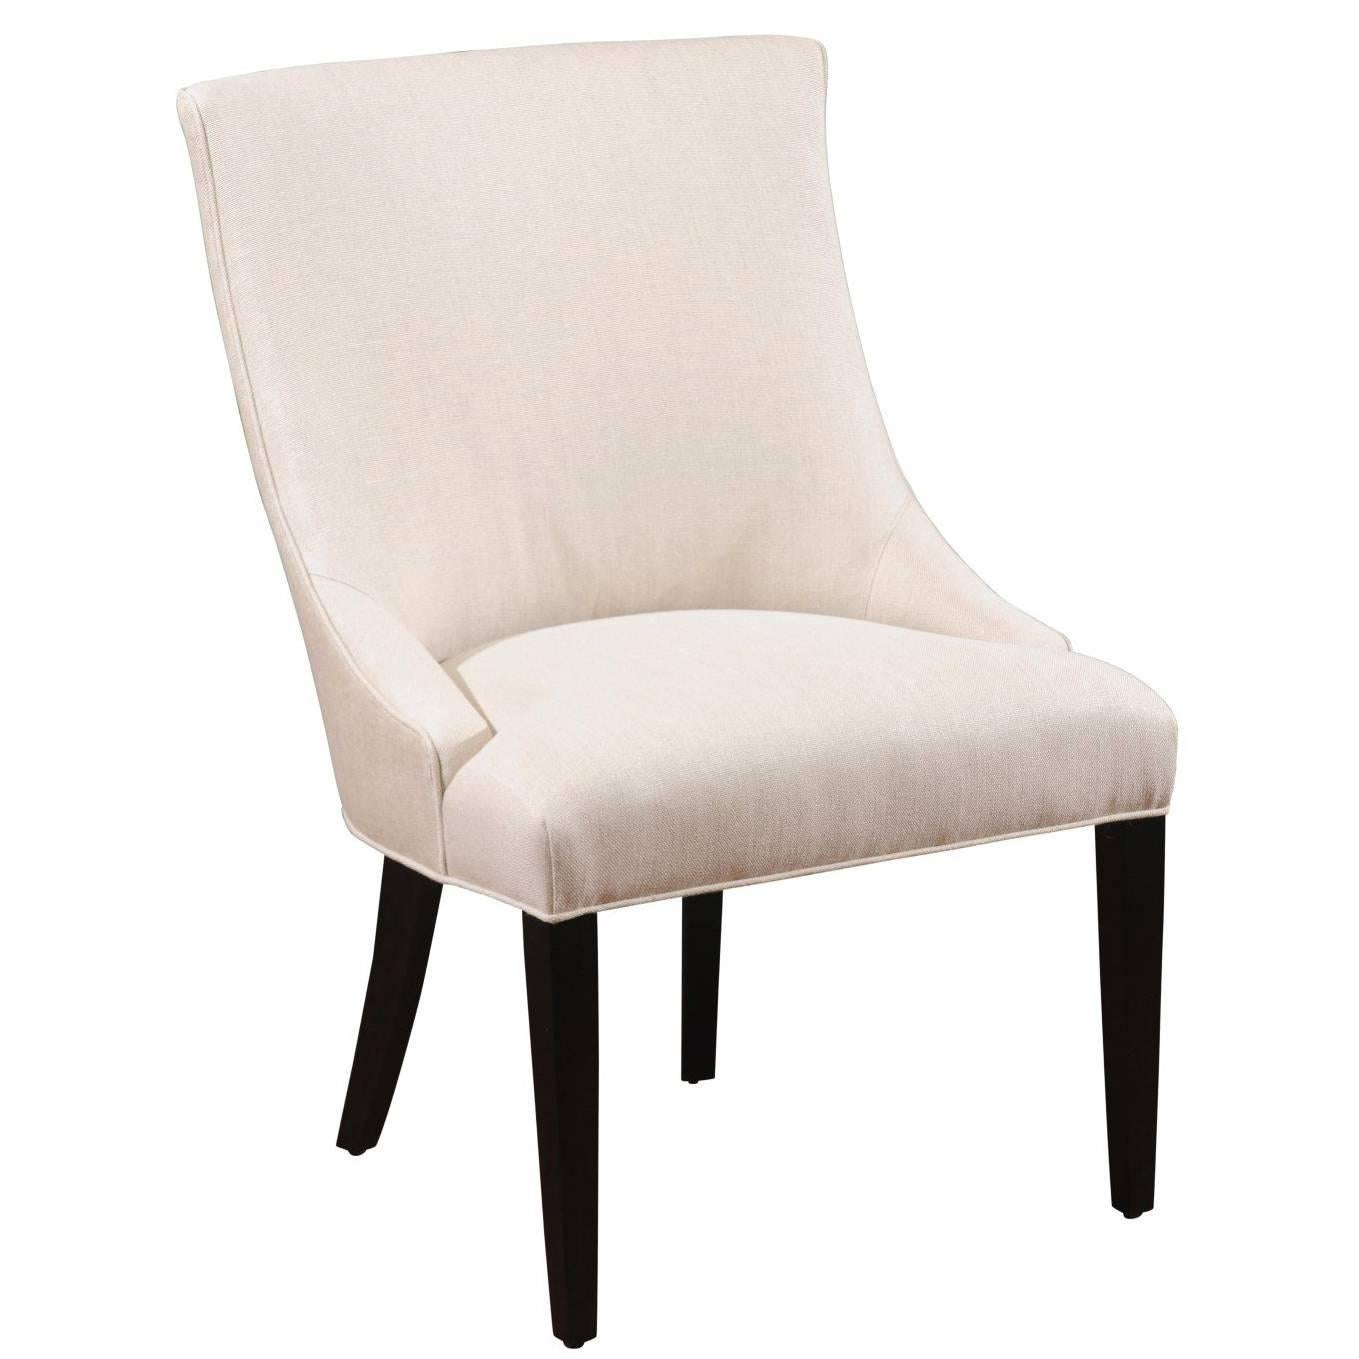 Contemporary Curved Back Chair For Sale